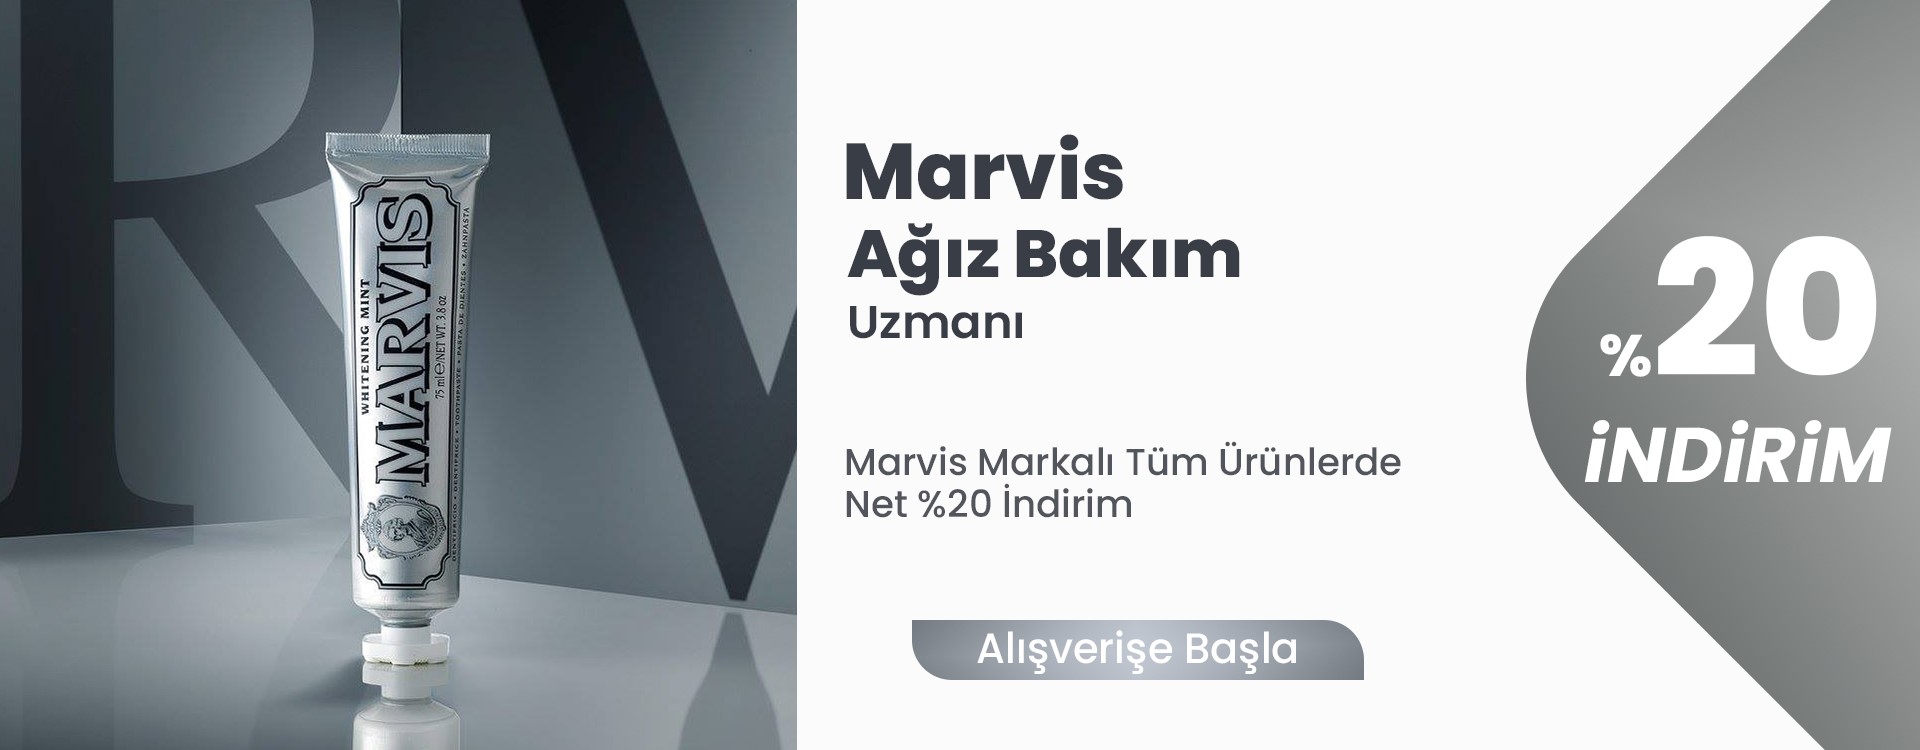 marvis%20